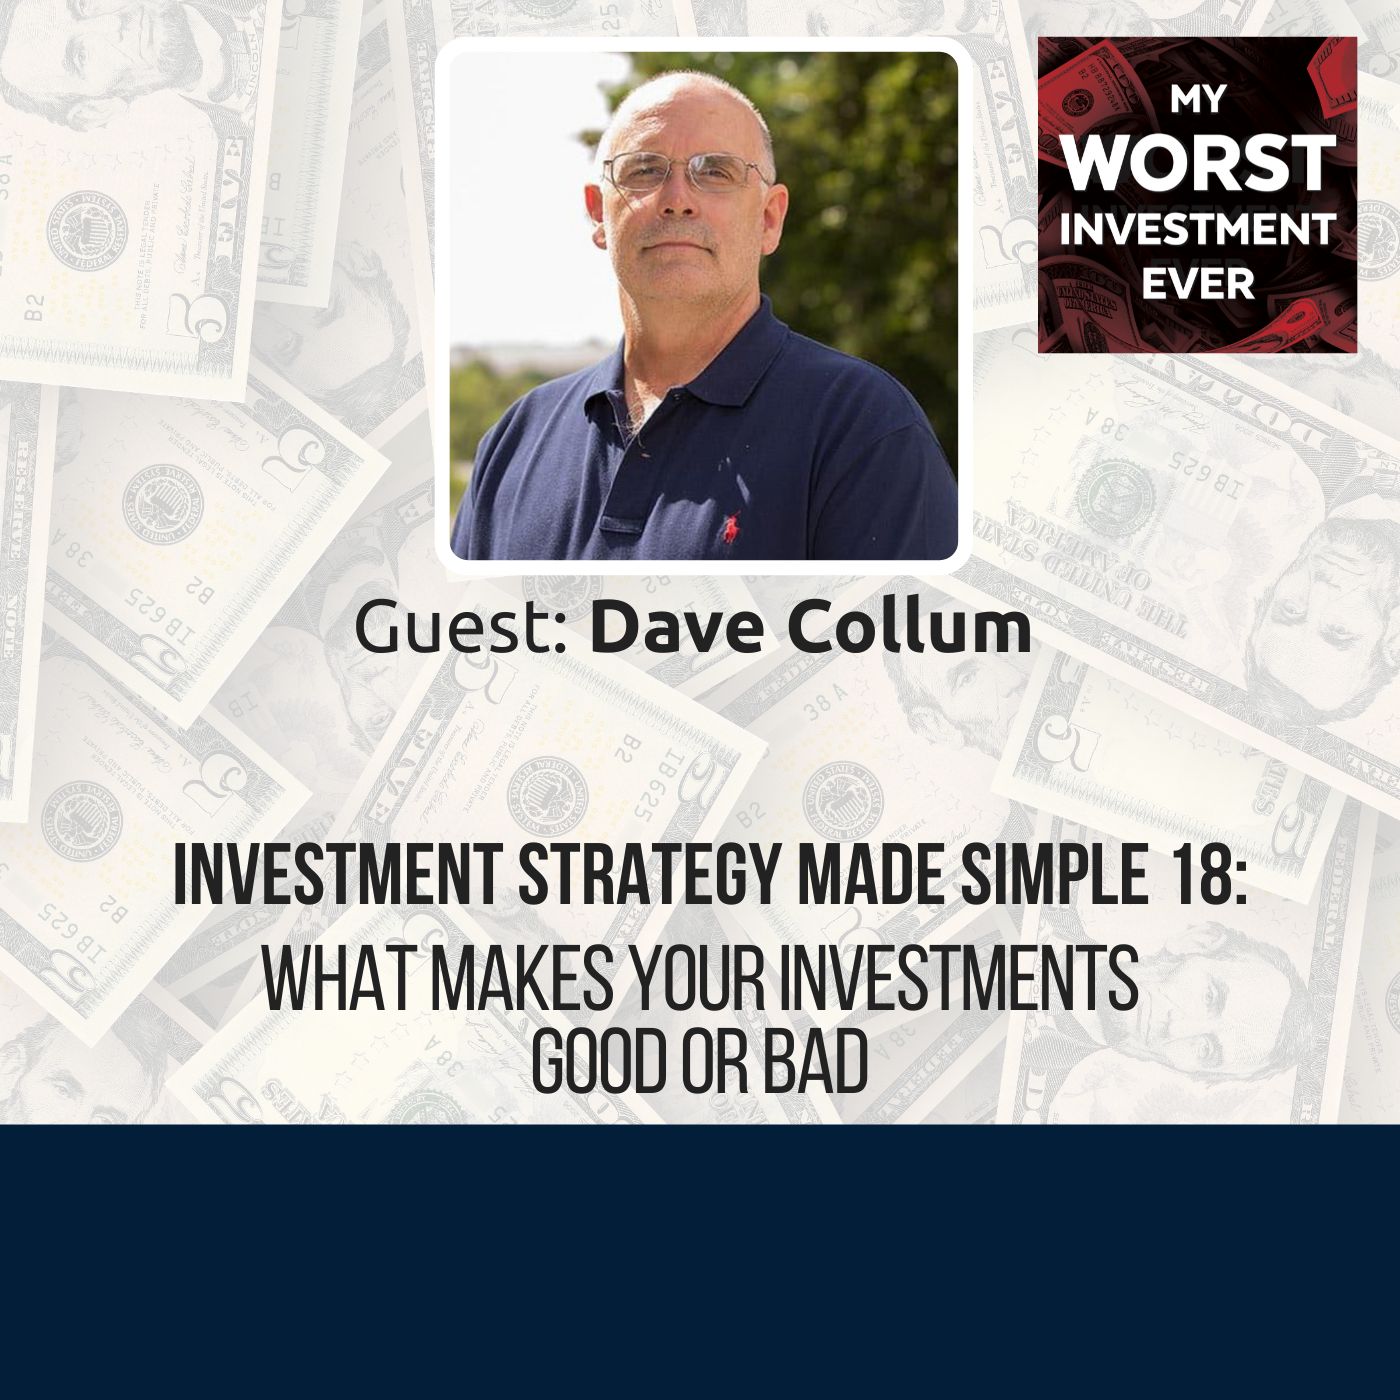 ISMS 18: Dave Collum – What Makes Your Investments Good or Bad